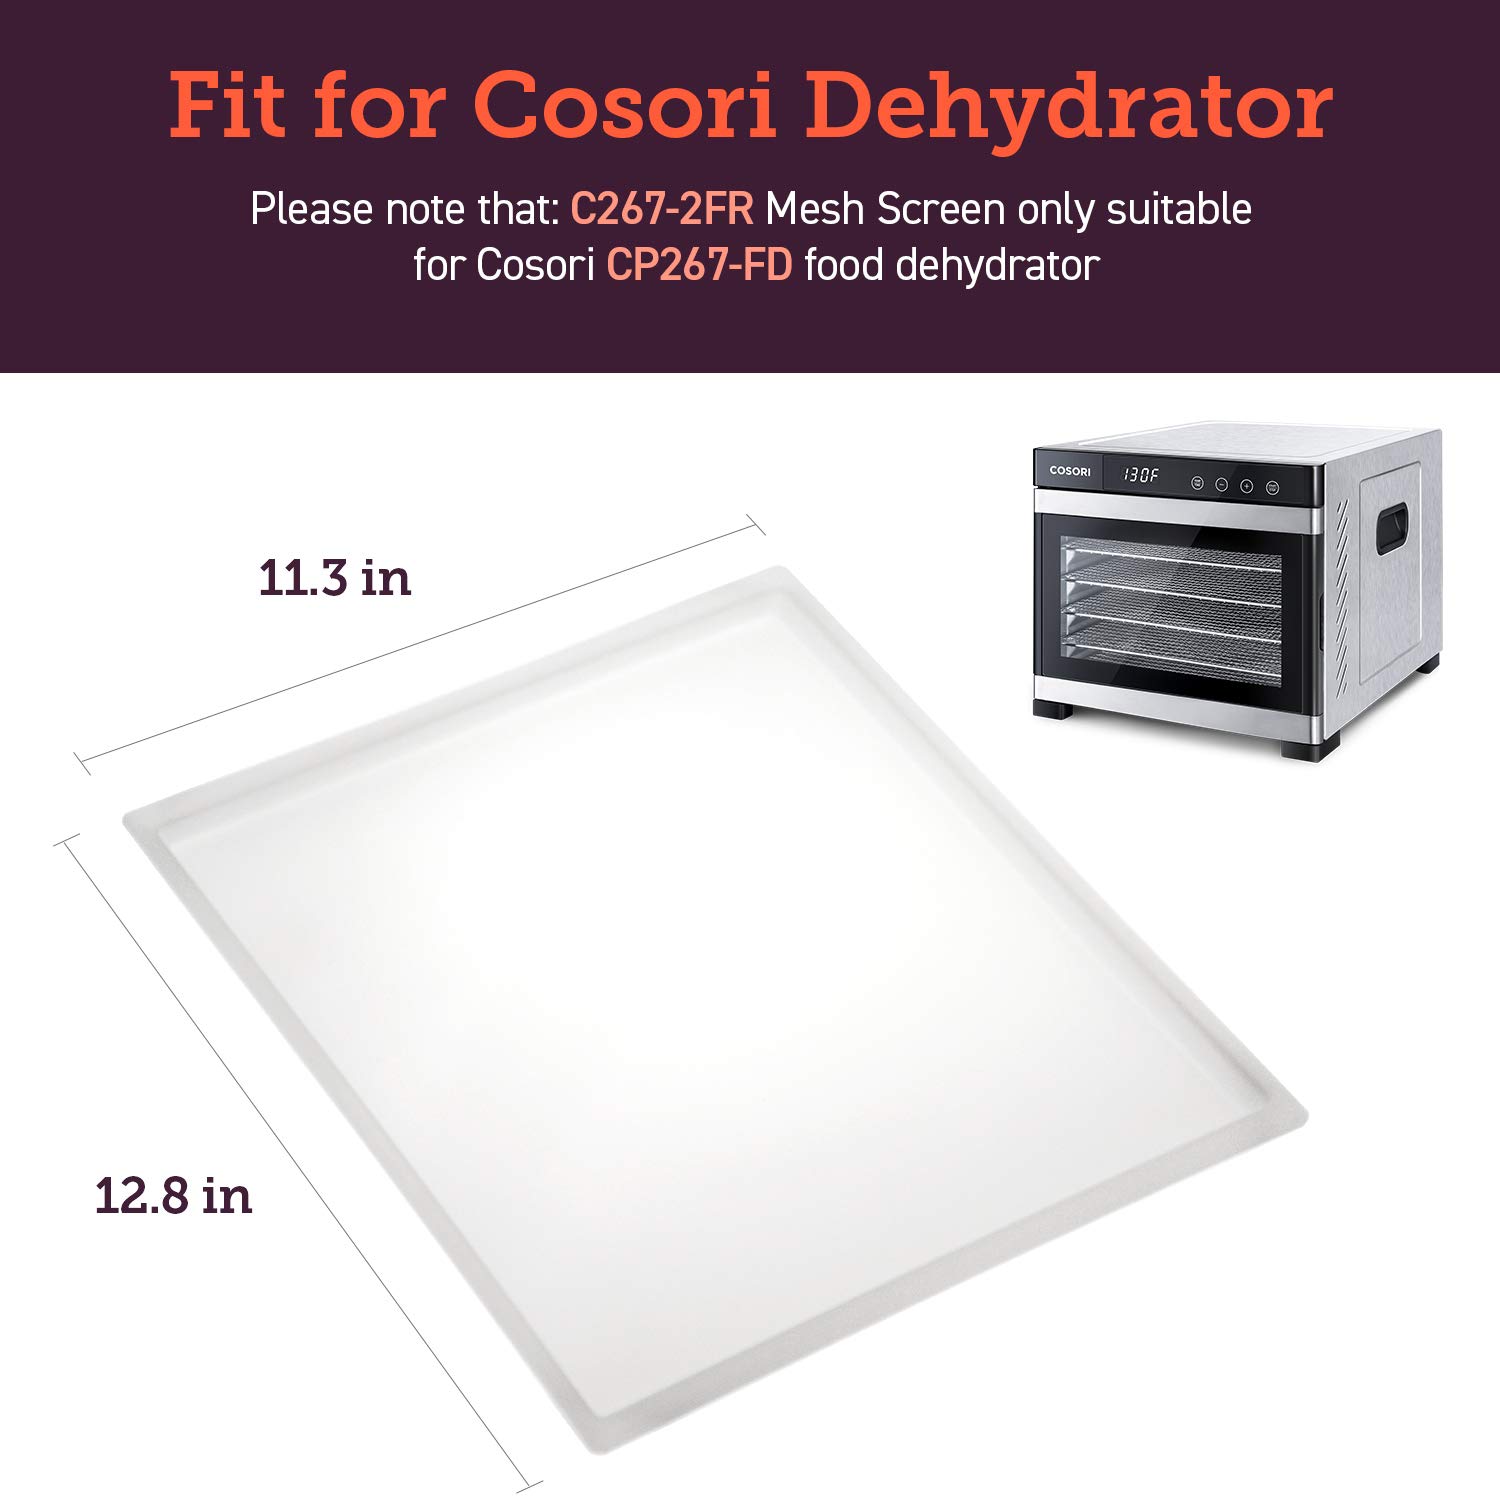 COSORI Food Dehydrator Accessories, 2Pack BPA-Free Fruit Roll Sheets, C267-2FR, Used for Dehydrated Food Like Fruit Leather, Jerky, Herbs, Meat, and Mushroom, White